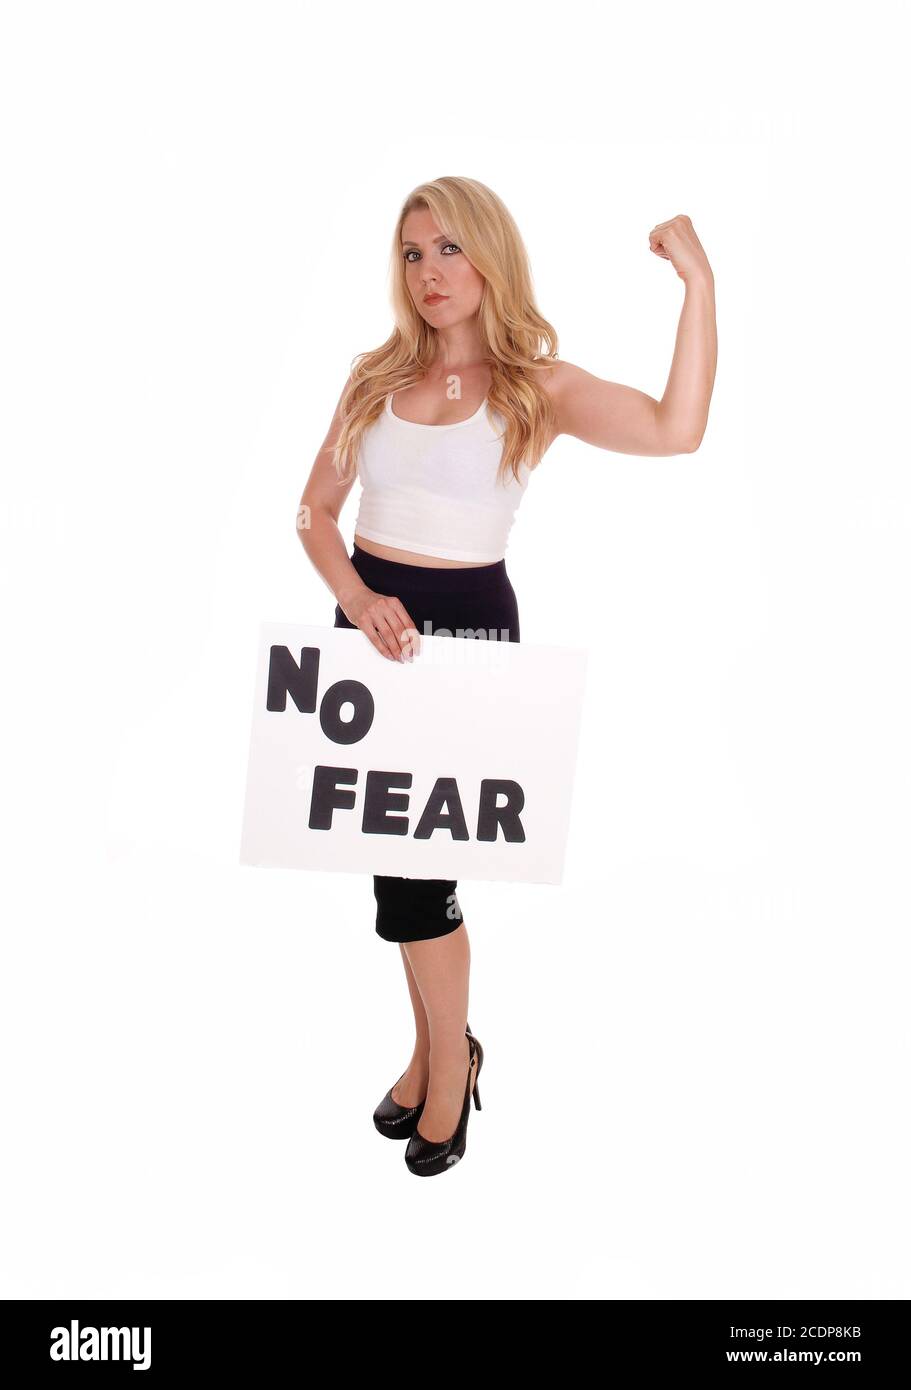 Blond woman holding sign NO FEAR. Stock Photo